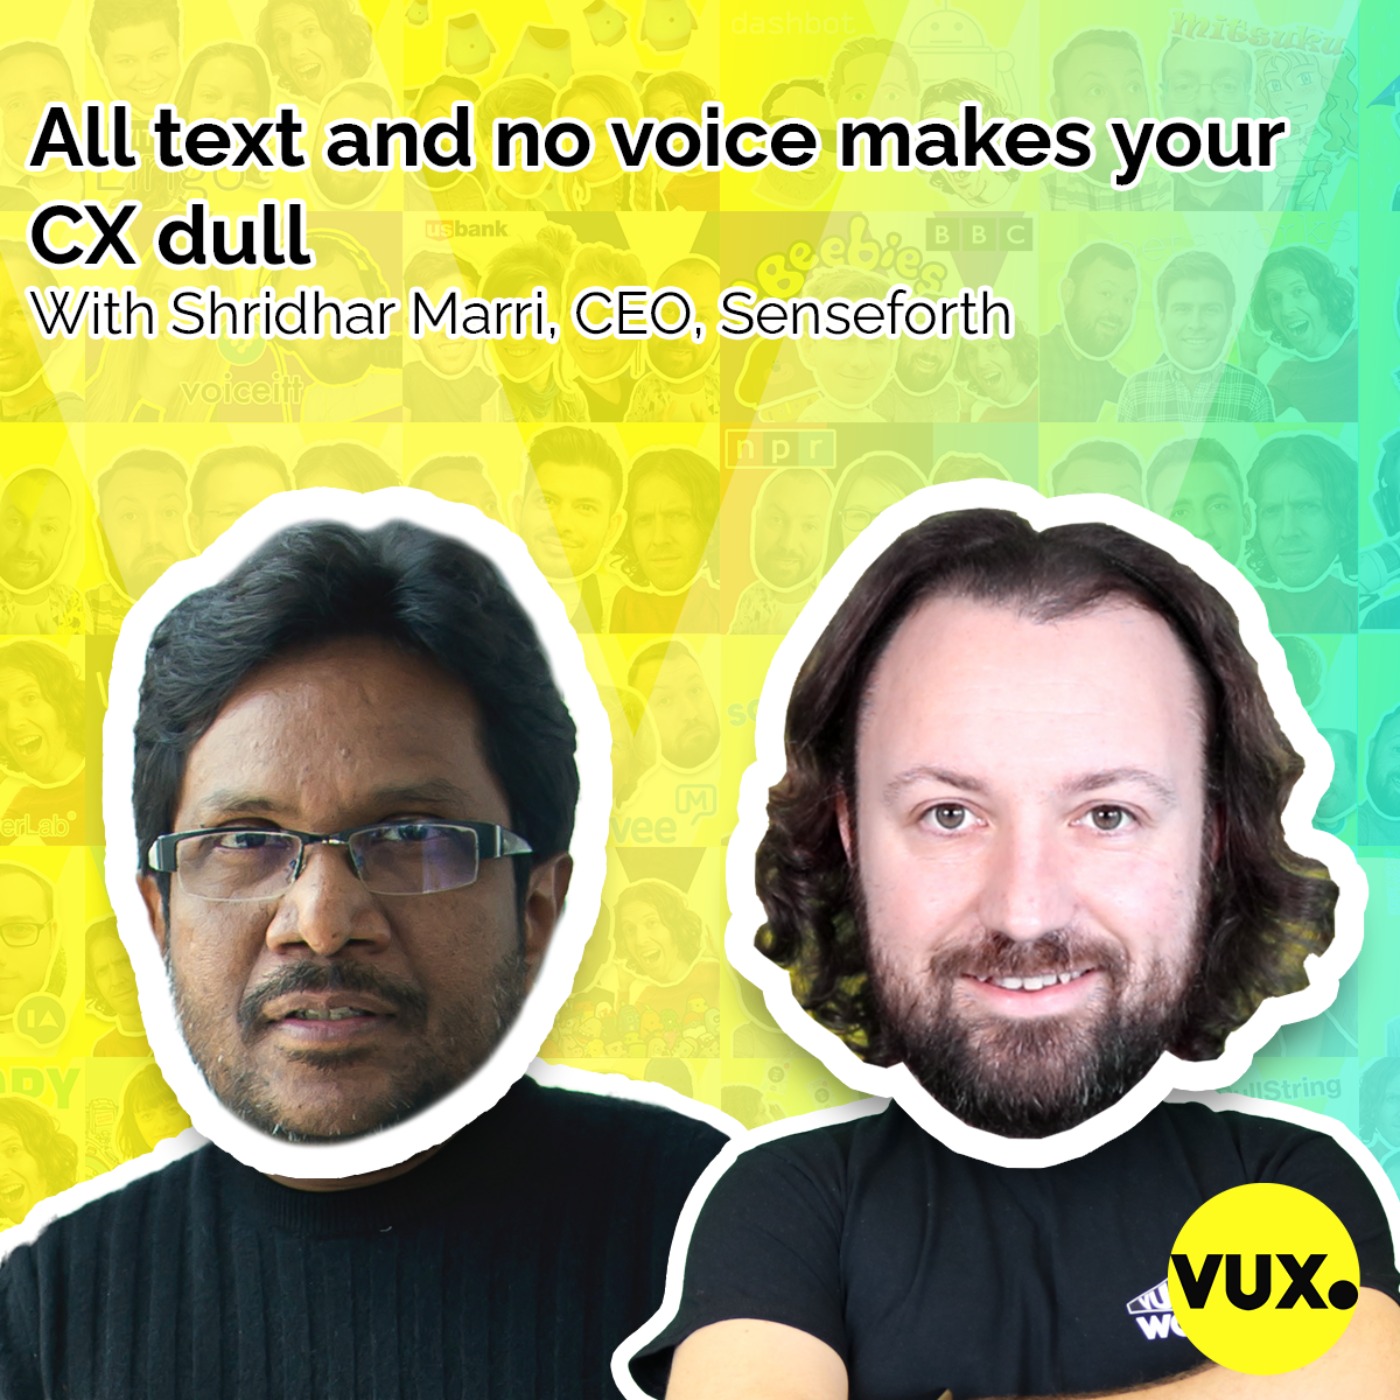 All text and no voice makes your CX dull, with Shridhar Marri, CEO, Senseforth